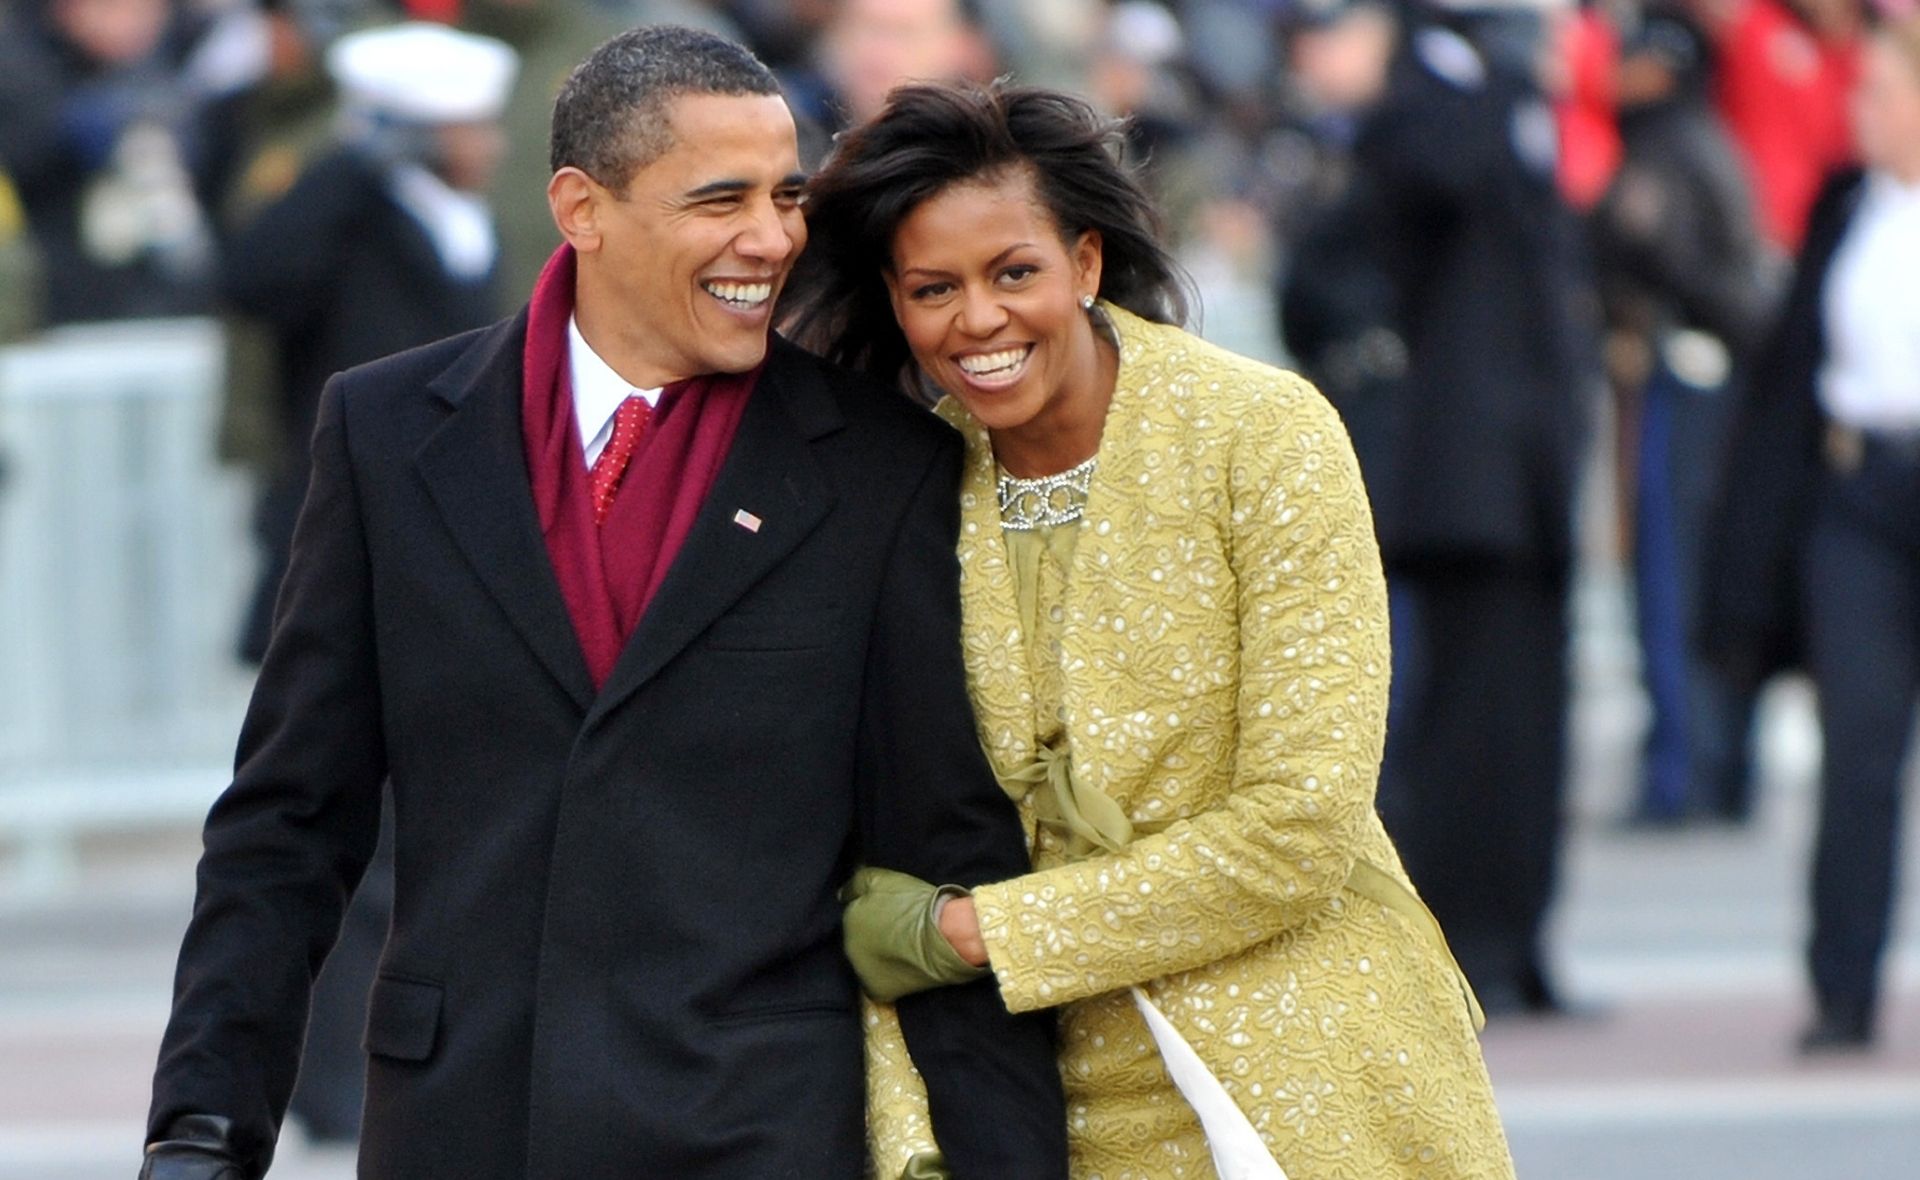 The Barack Obama and Michelle Obama love story